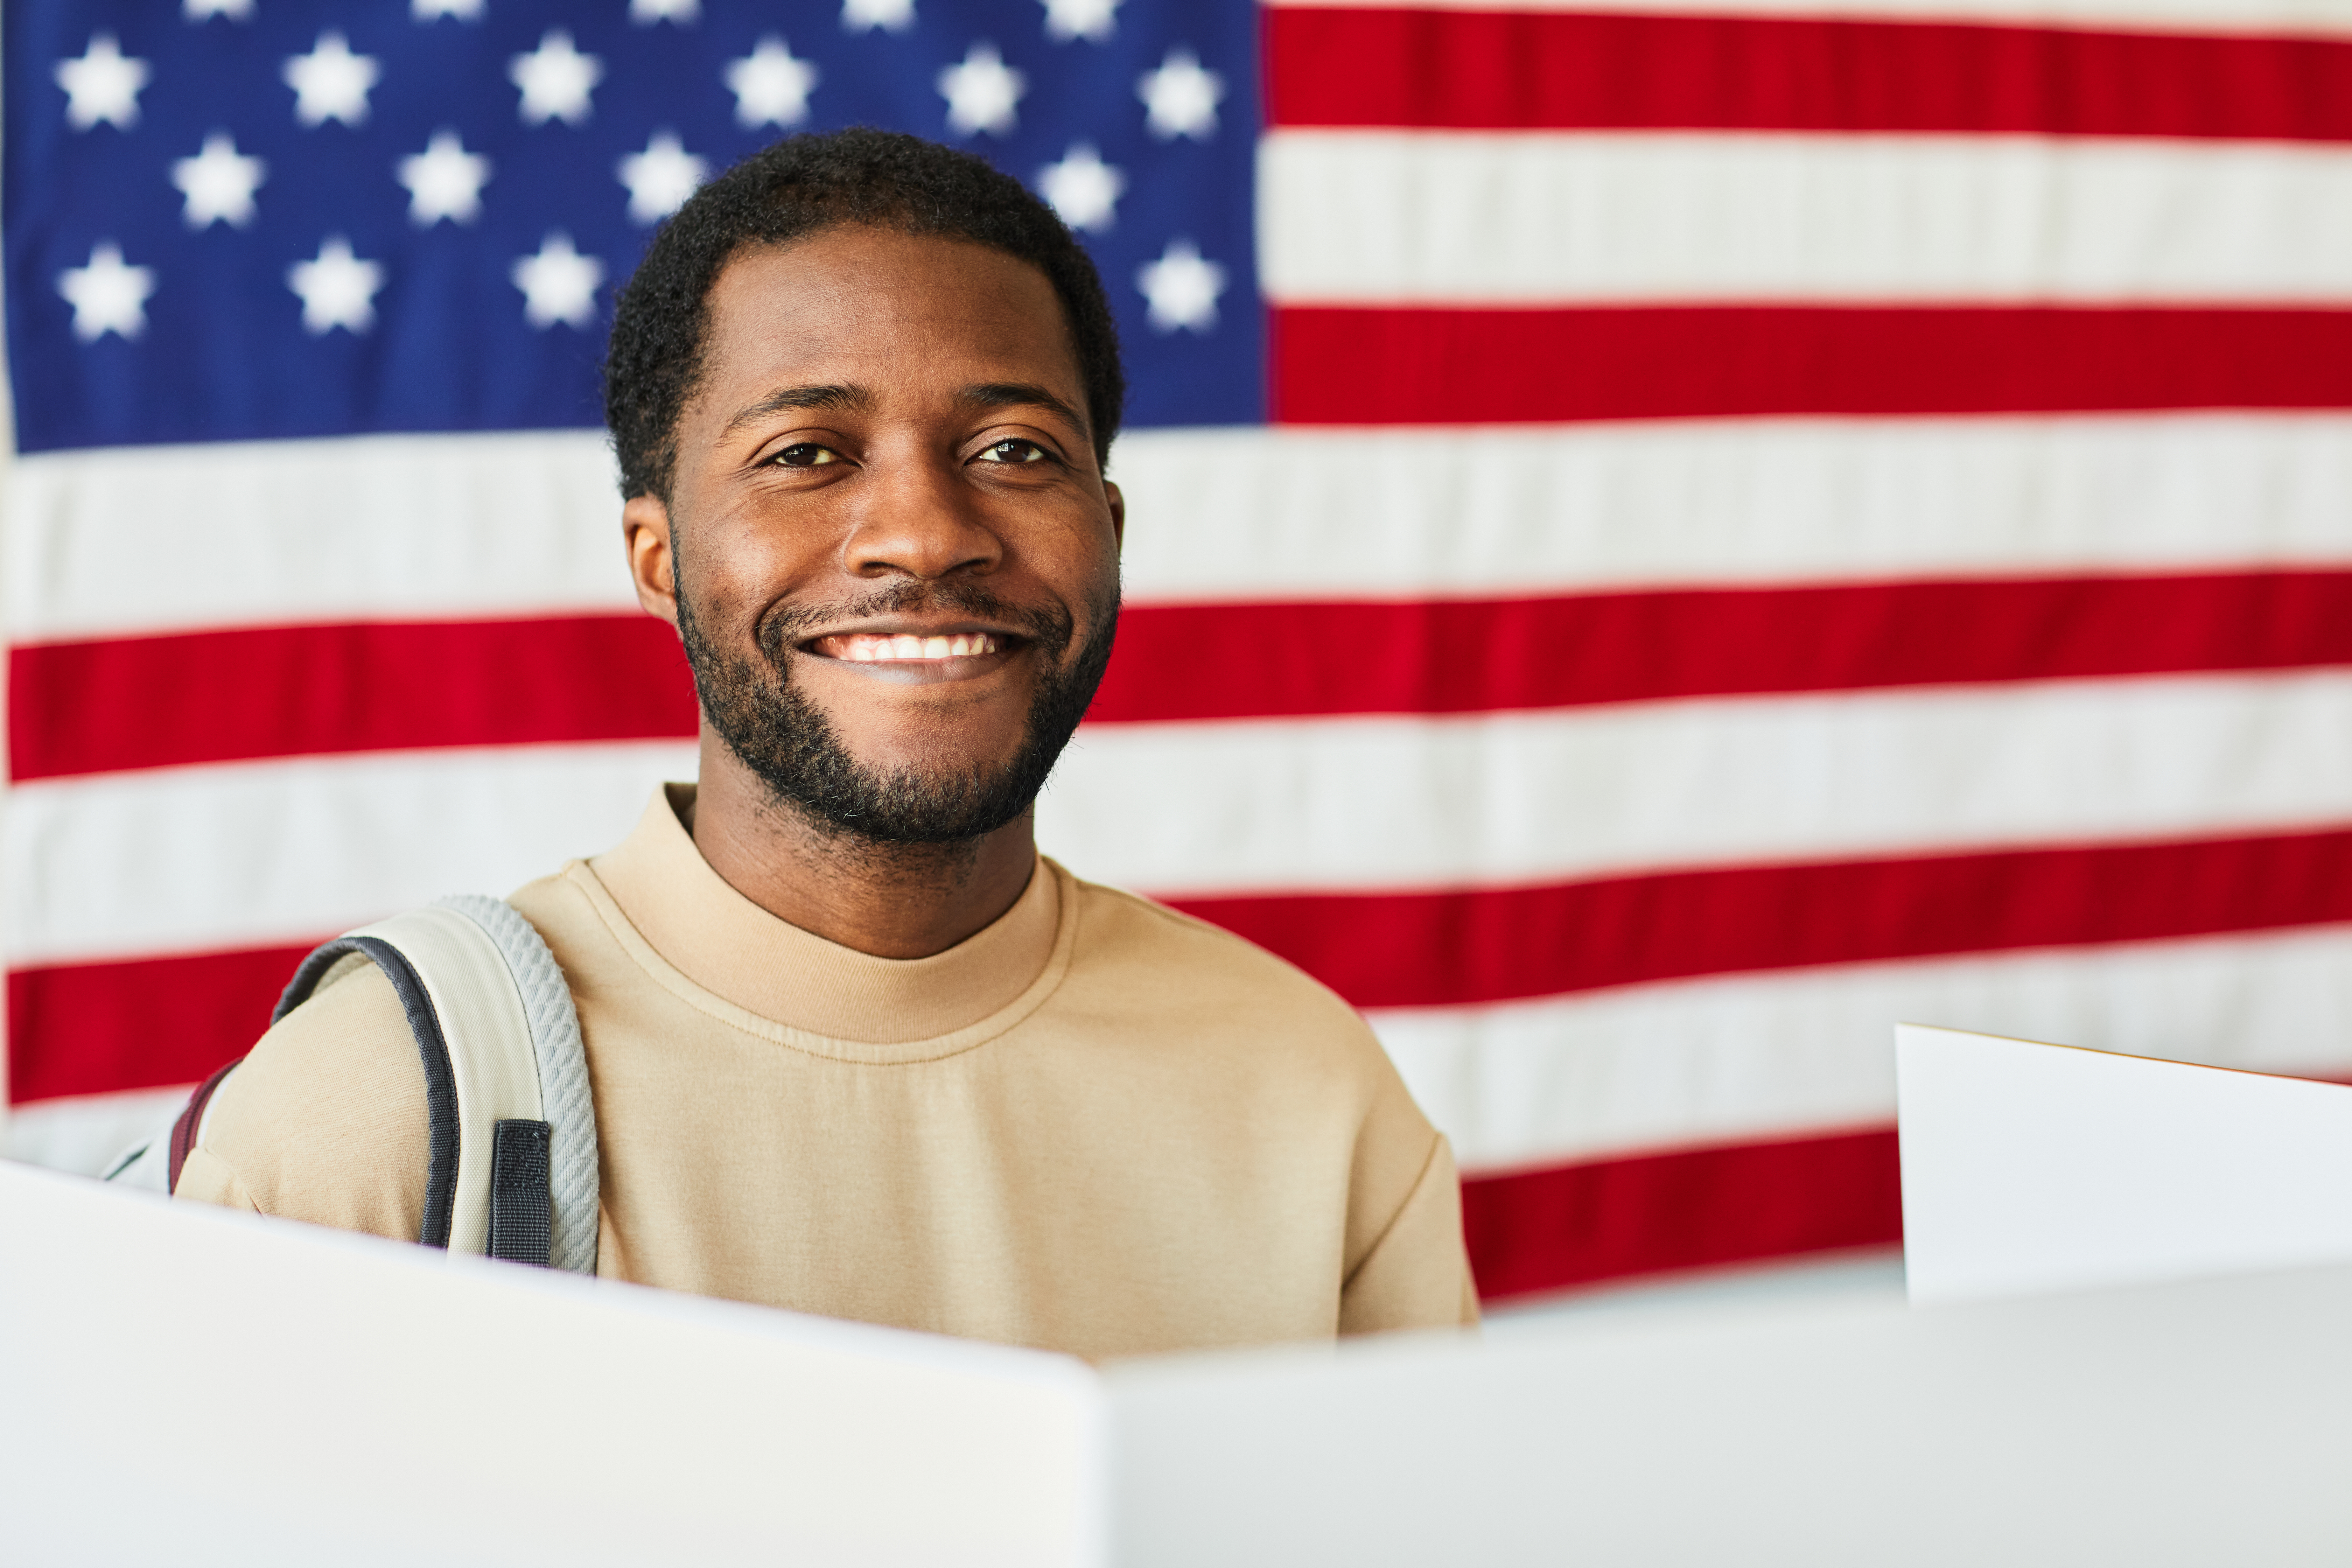 Portrait of smiling  man voting against USA banner background